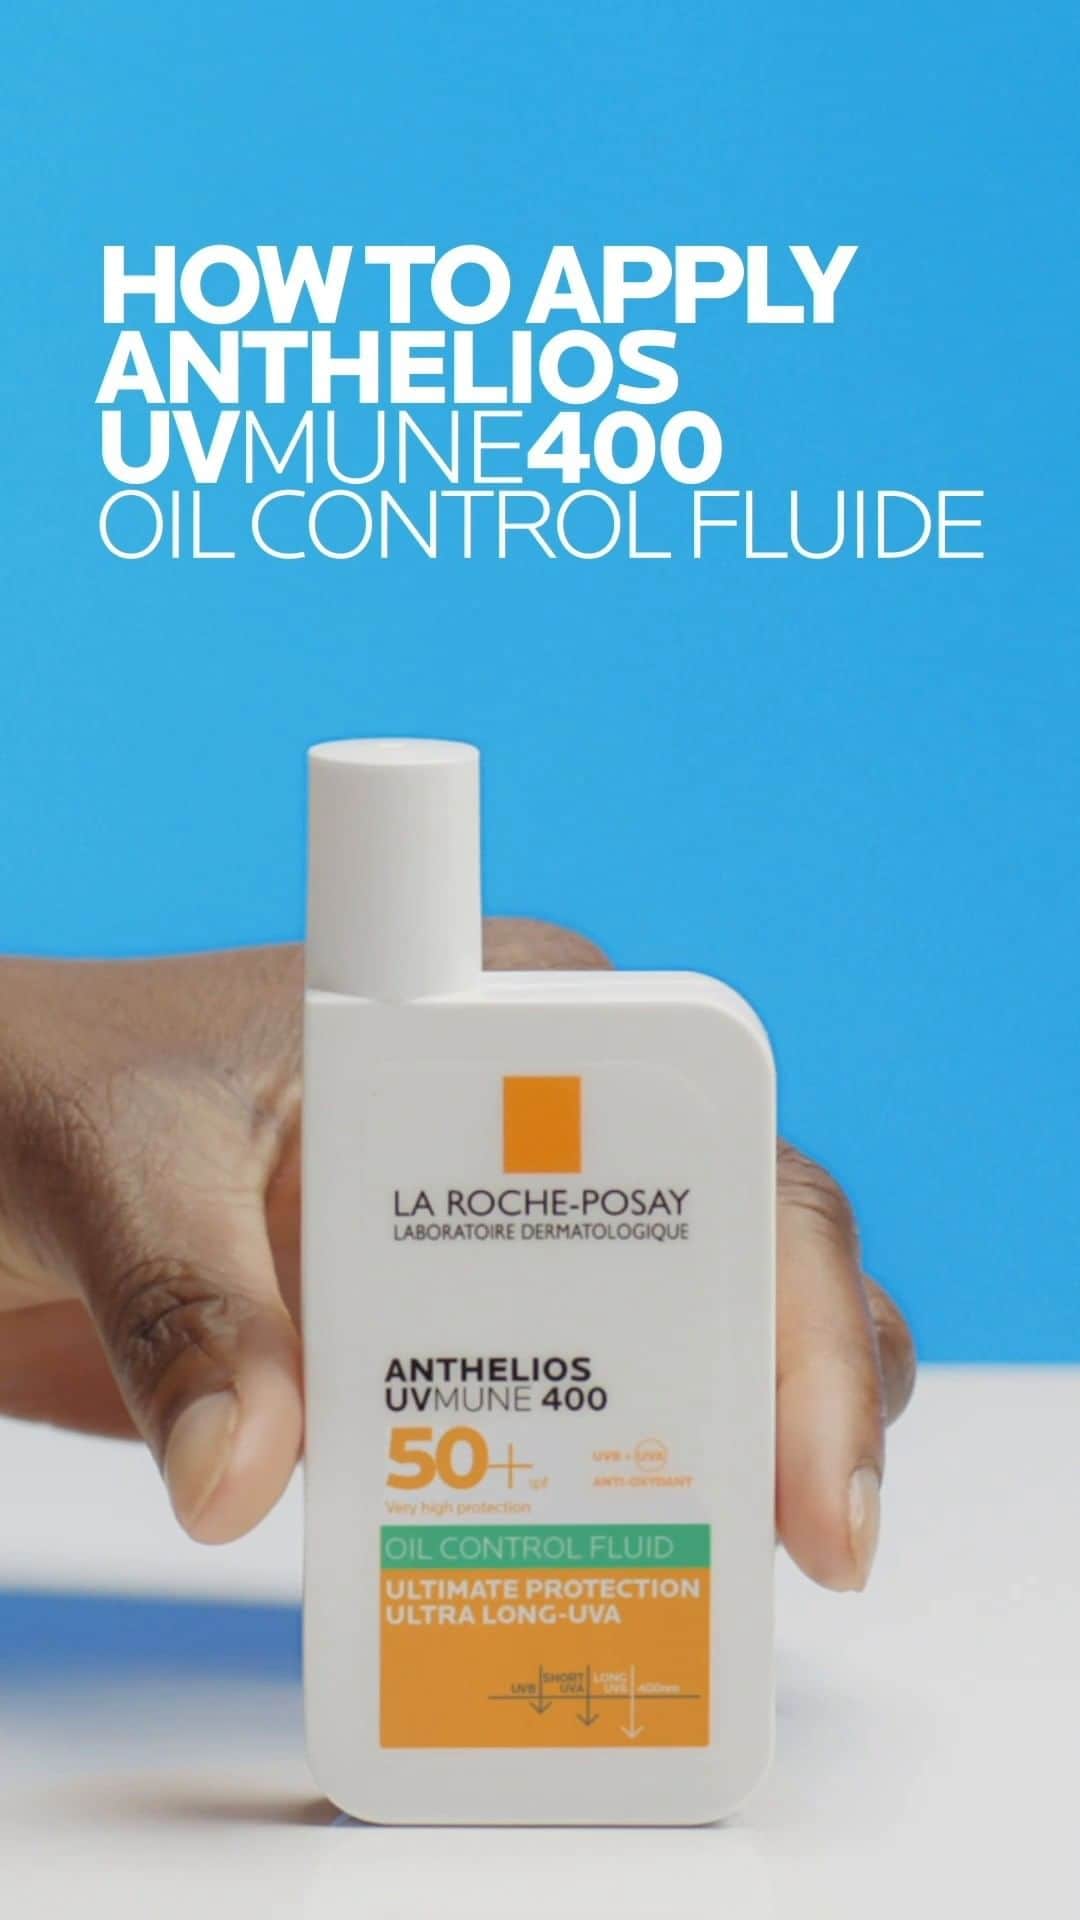 La Roche-Posayのインスタグラム：「☀️🛡️ Follow our guide to applying Anthelios UVmune 400 oil control fluid SPF+ and make the most of your matte-finish sun protection. Your flawless sun-protected glow is just 3 steps away!  All languages spoken here! Feel free to talk to us at anytime. #larocheposay #anthelios #sunprotection  Global official page from La Roche-Posay, France.」